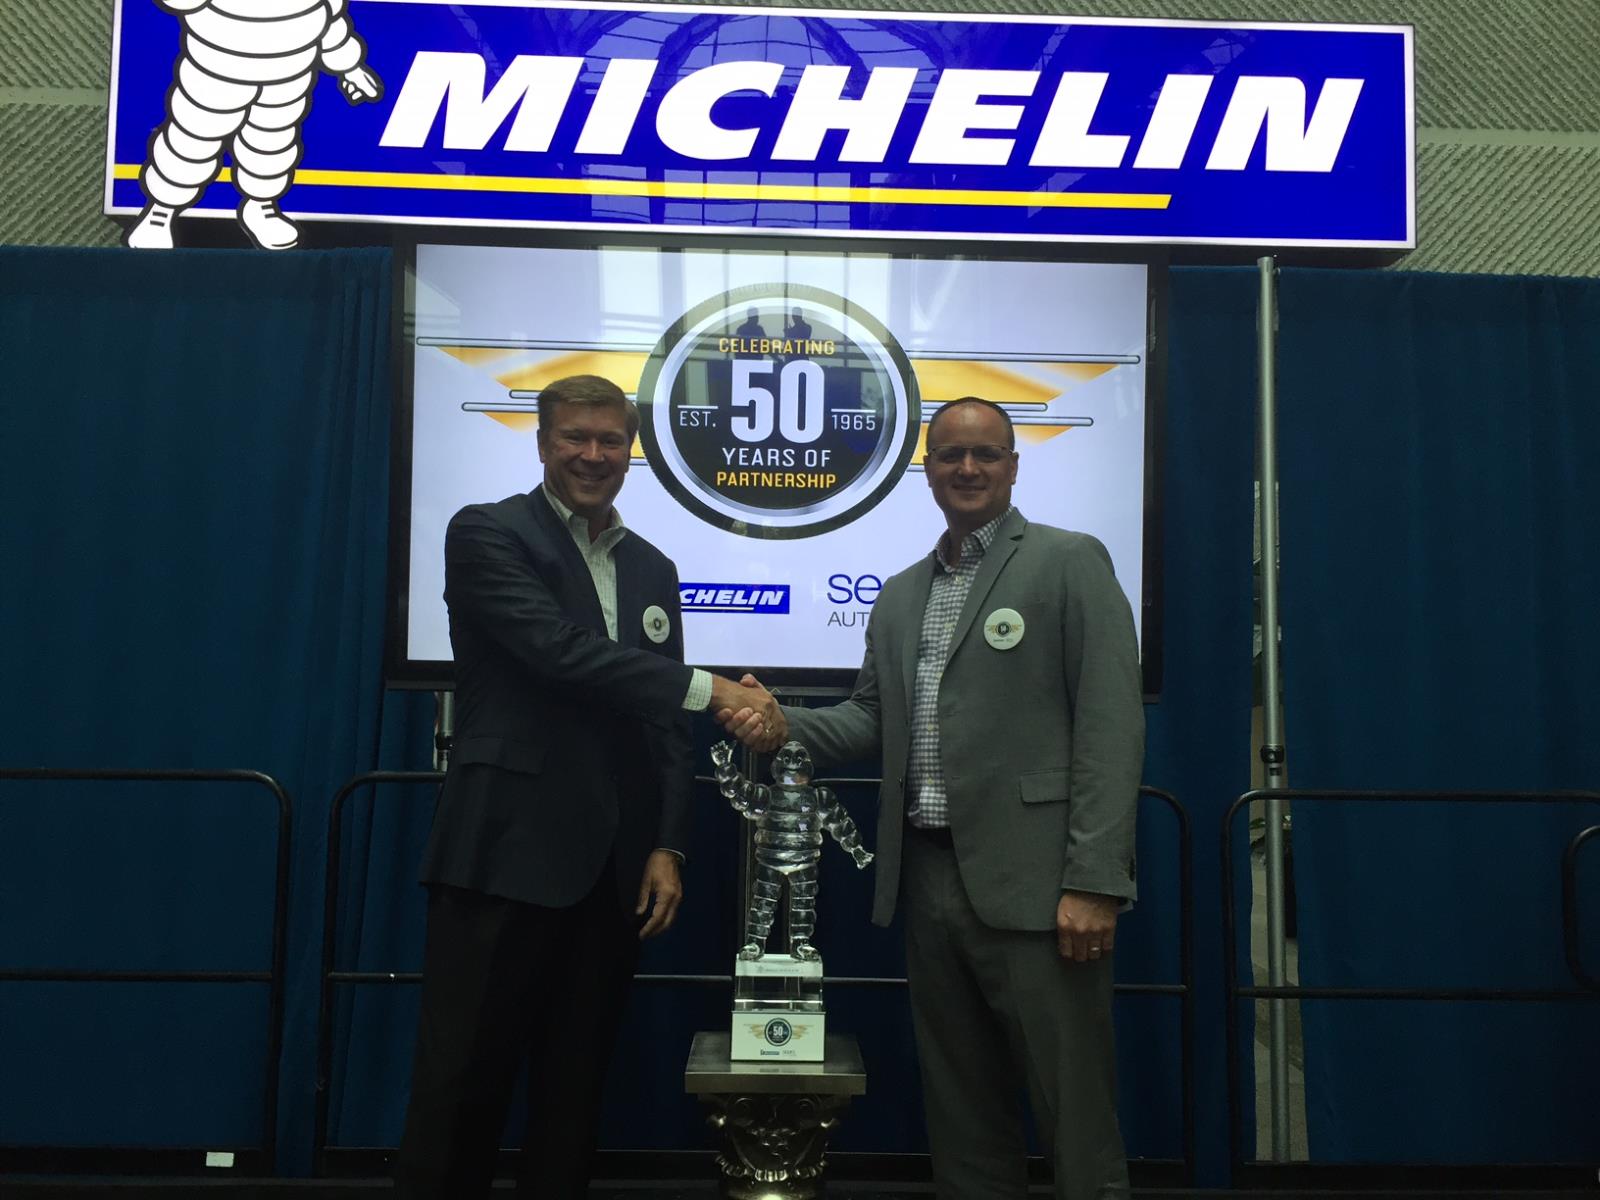 50 years, 135 million tyres – Michelin reaches retail milestone with Sears